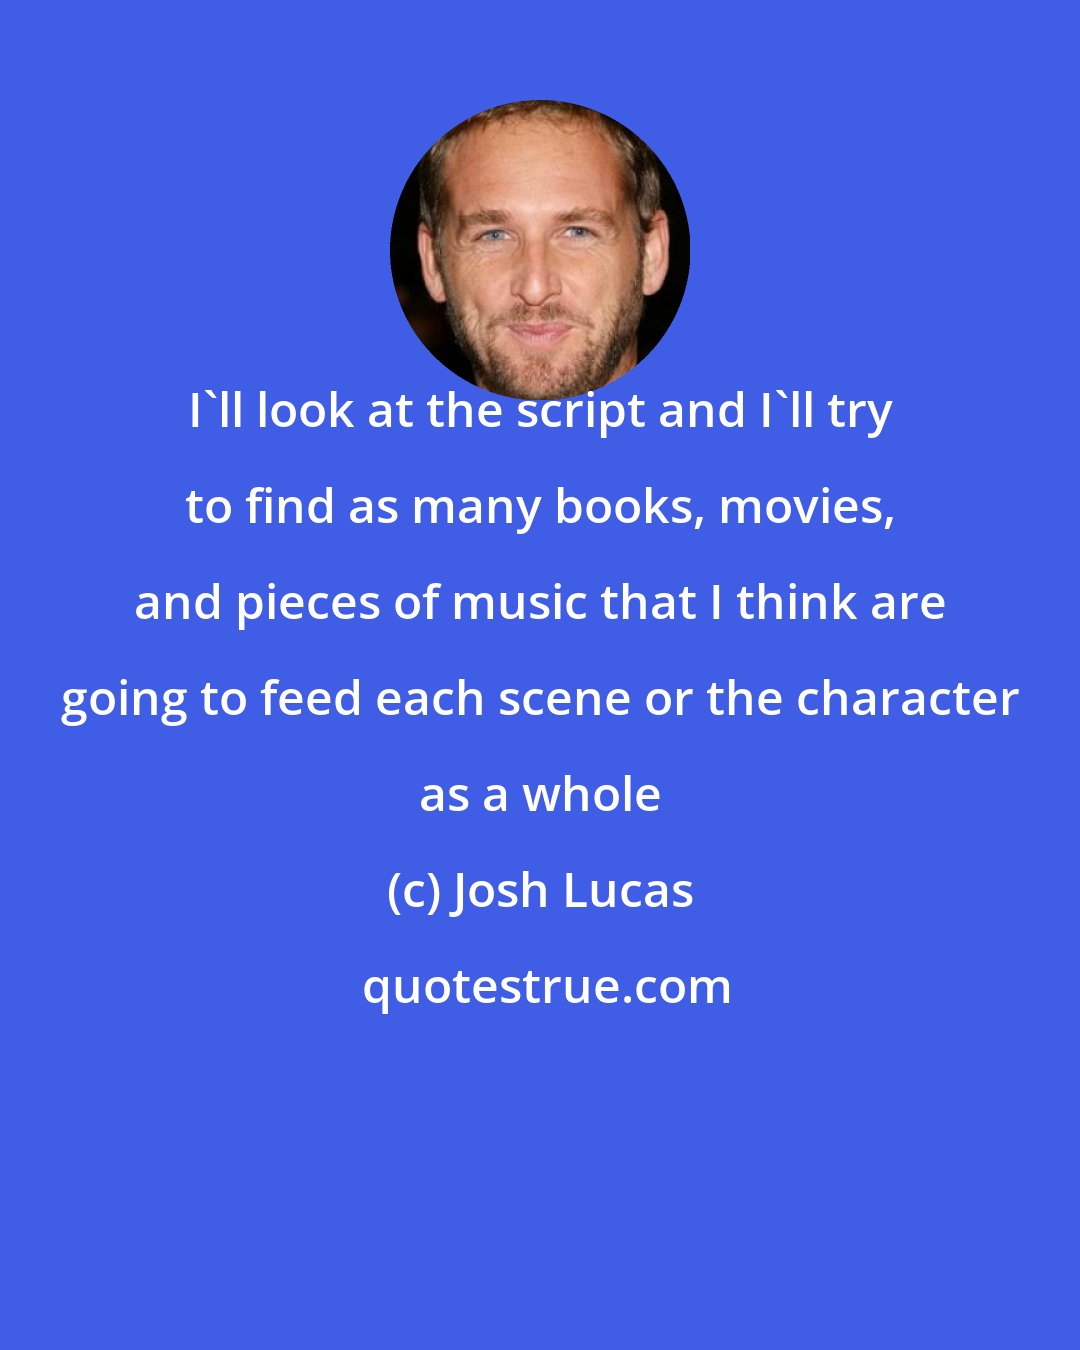 Josh Lucas: I'll look at the script and I'll try to find as many books, movies, and pieces of music that I think are going to feed each scene or the character as a whole